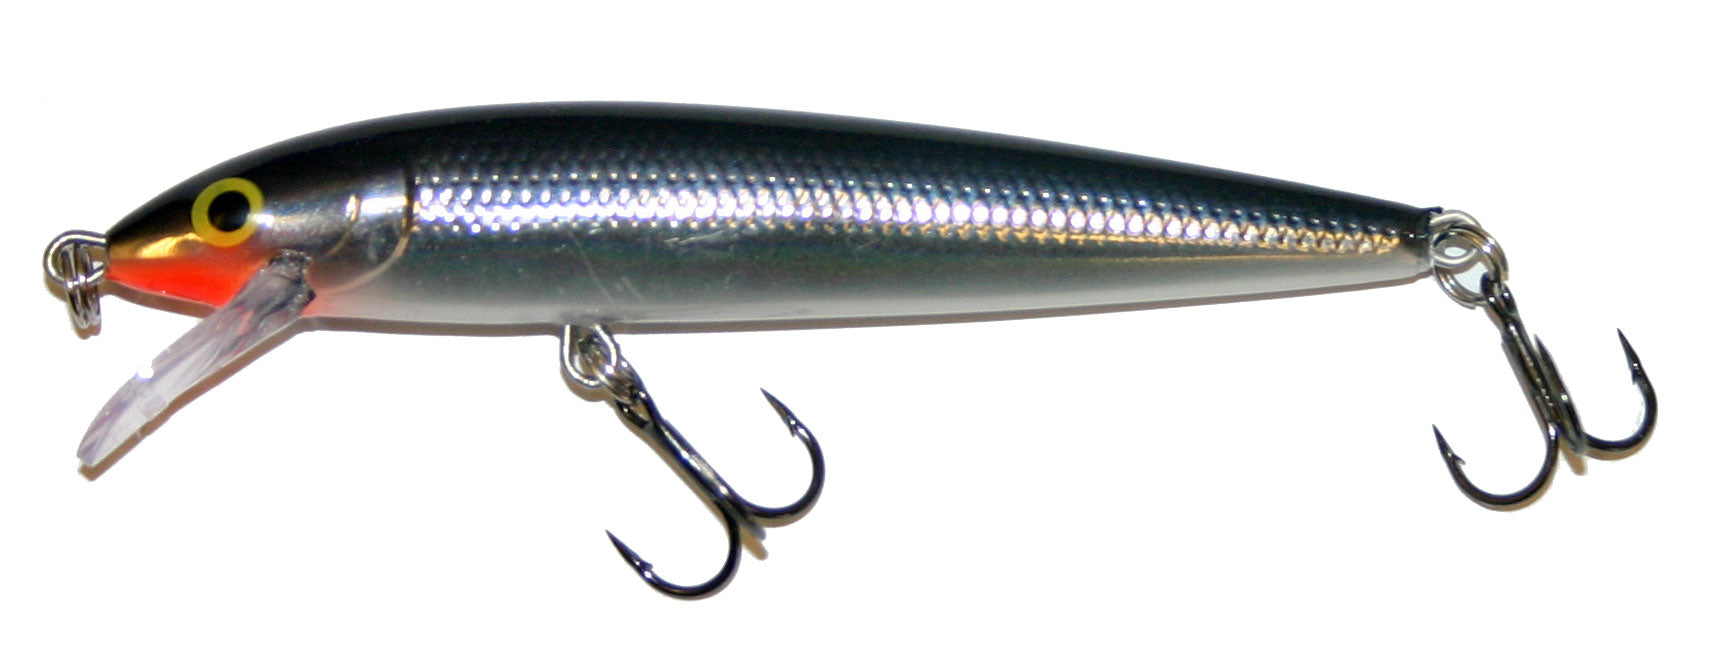 Rapala Husky Jerk 12 Fishing Lure 4.75 716oz Baby Bass - Suspending Action,  Loud Rattles, Superior Finishes